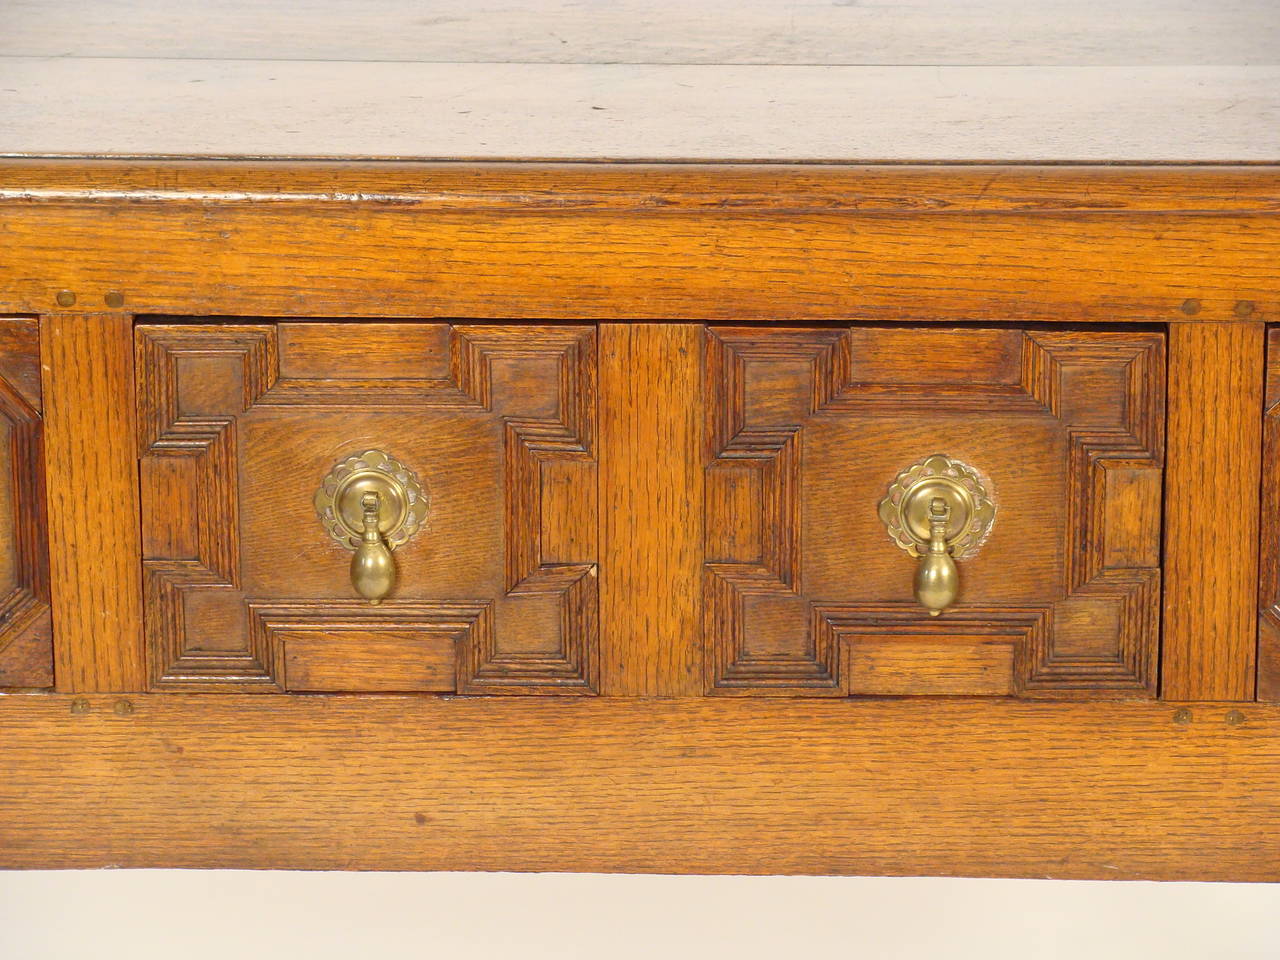 William & Mary / Queen Anne transitional style oak sideboard, bench made, circa 1920.